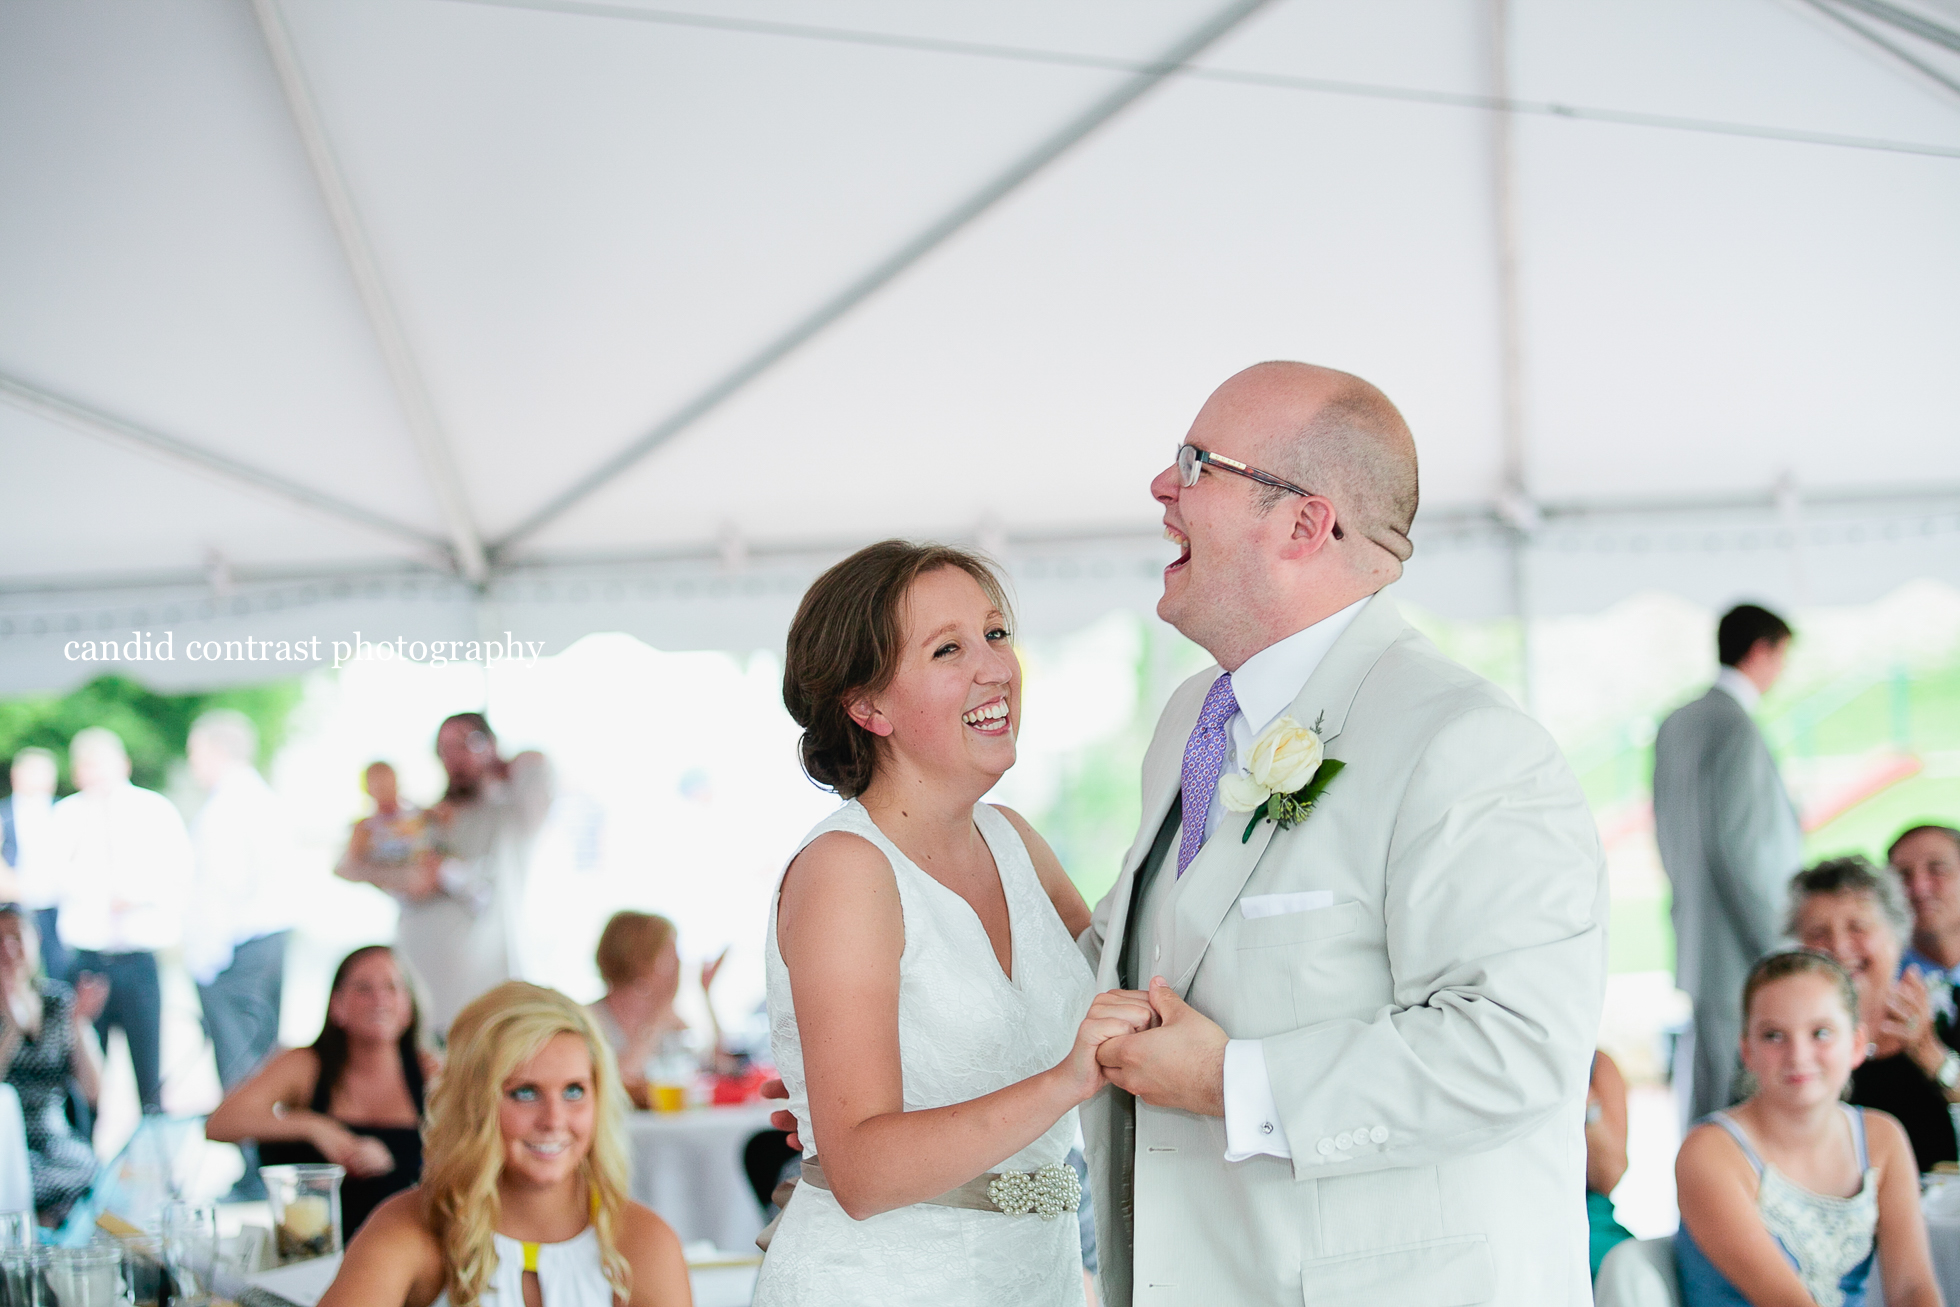 port of dubuque stone cliff winery wedding, candid contrast photography